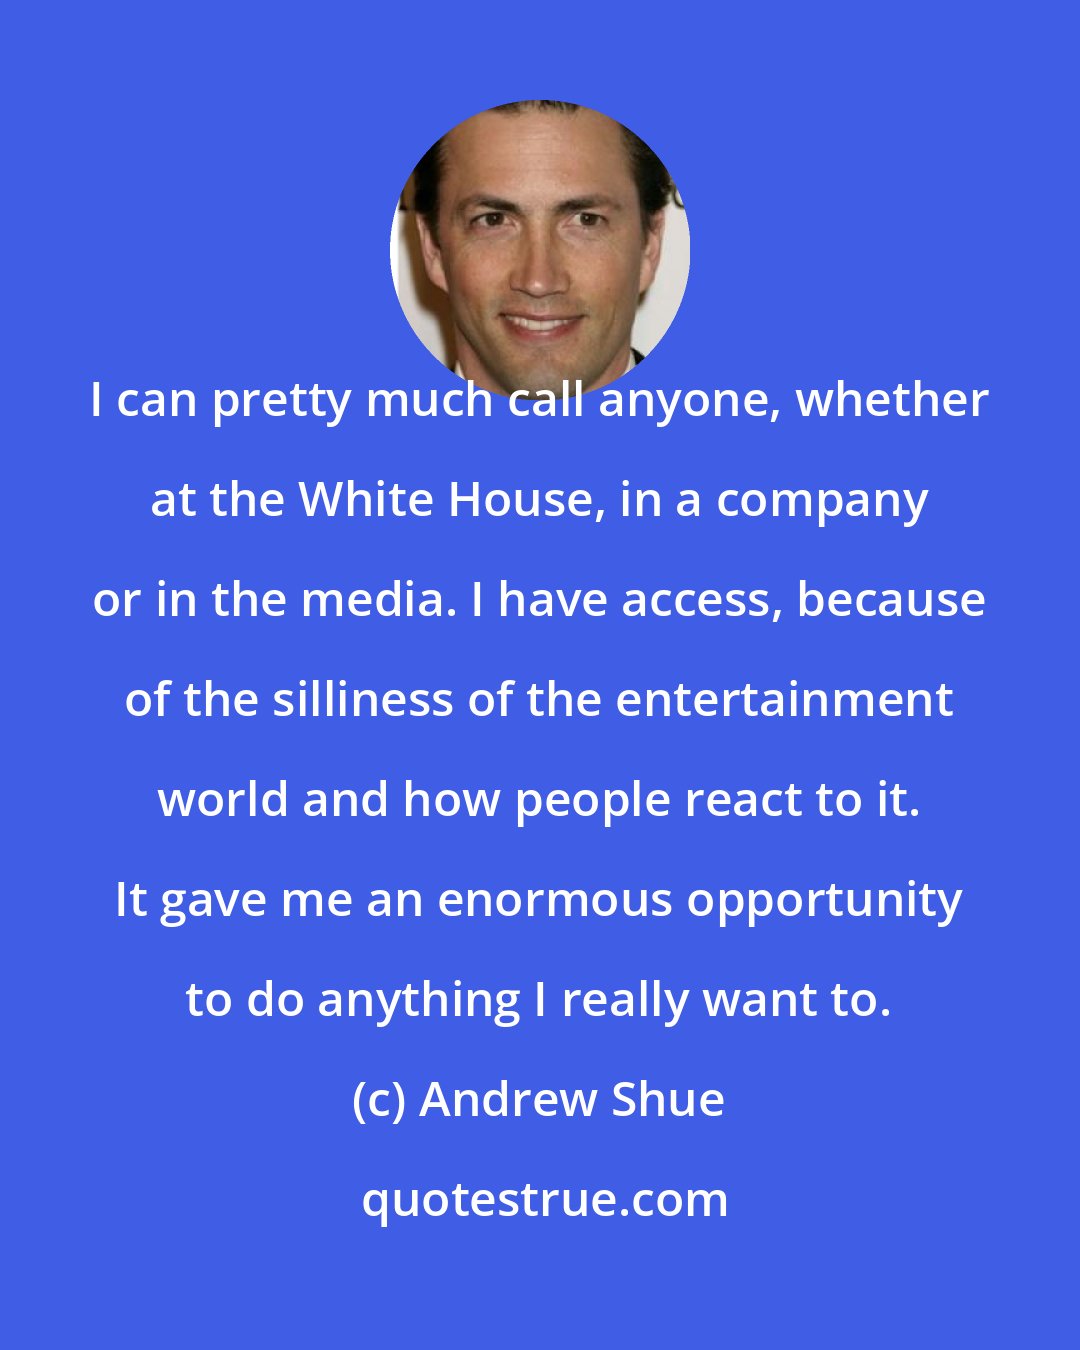 Andrew Shue: I can pretty much call anyone, whether at the White House, in a company or in the media. I have access, because of the silliness of the entertainment world and how people react to it. It gave me an enormous opportunity to do anything I really want to.